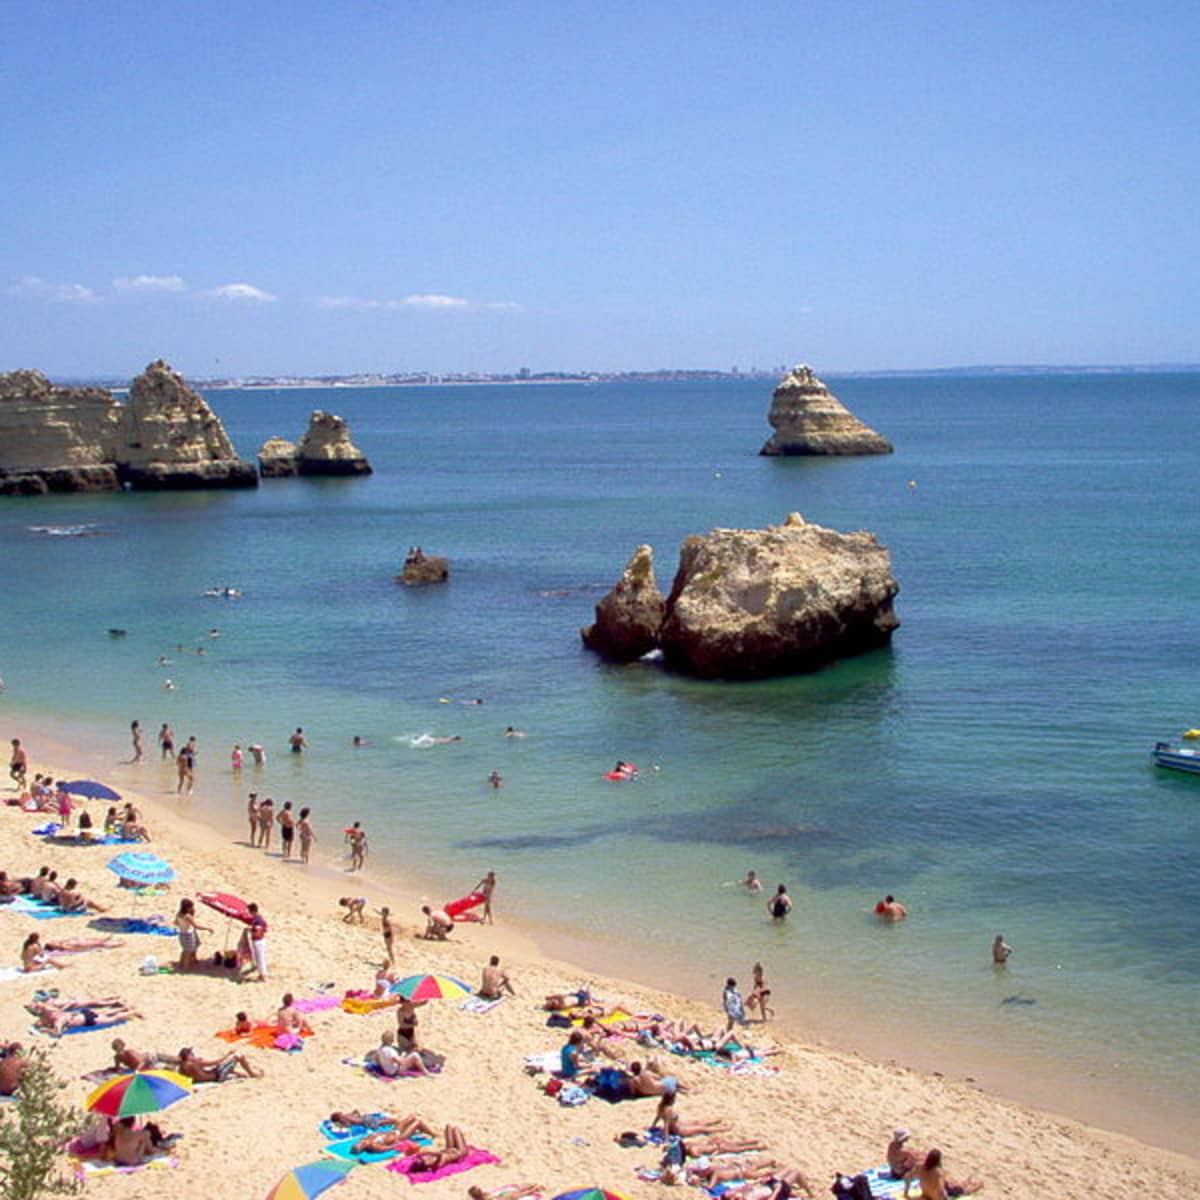 Cities and Towns In the Algarve You Should Visit During Your Holiday